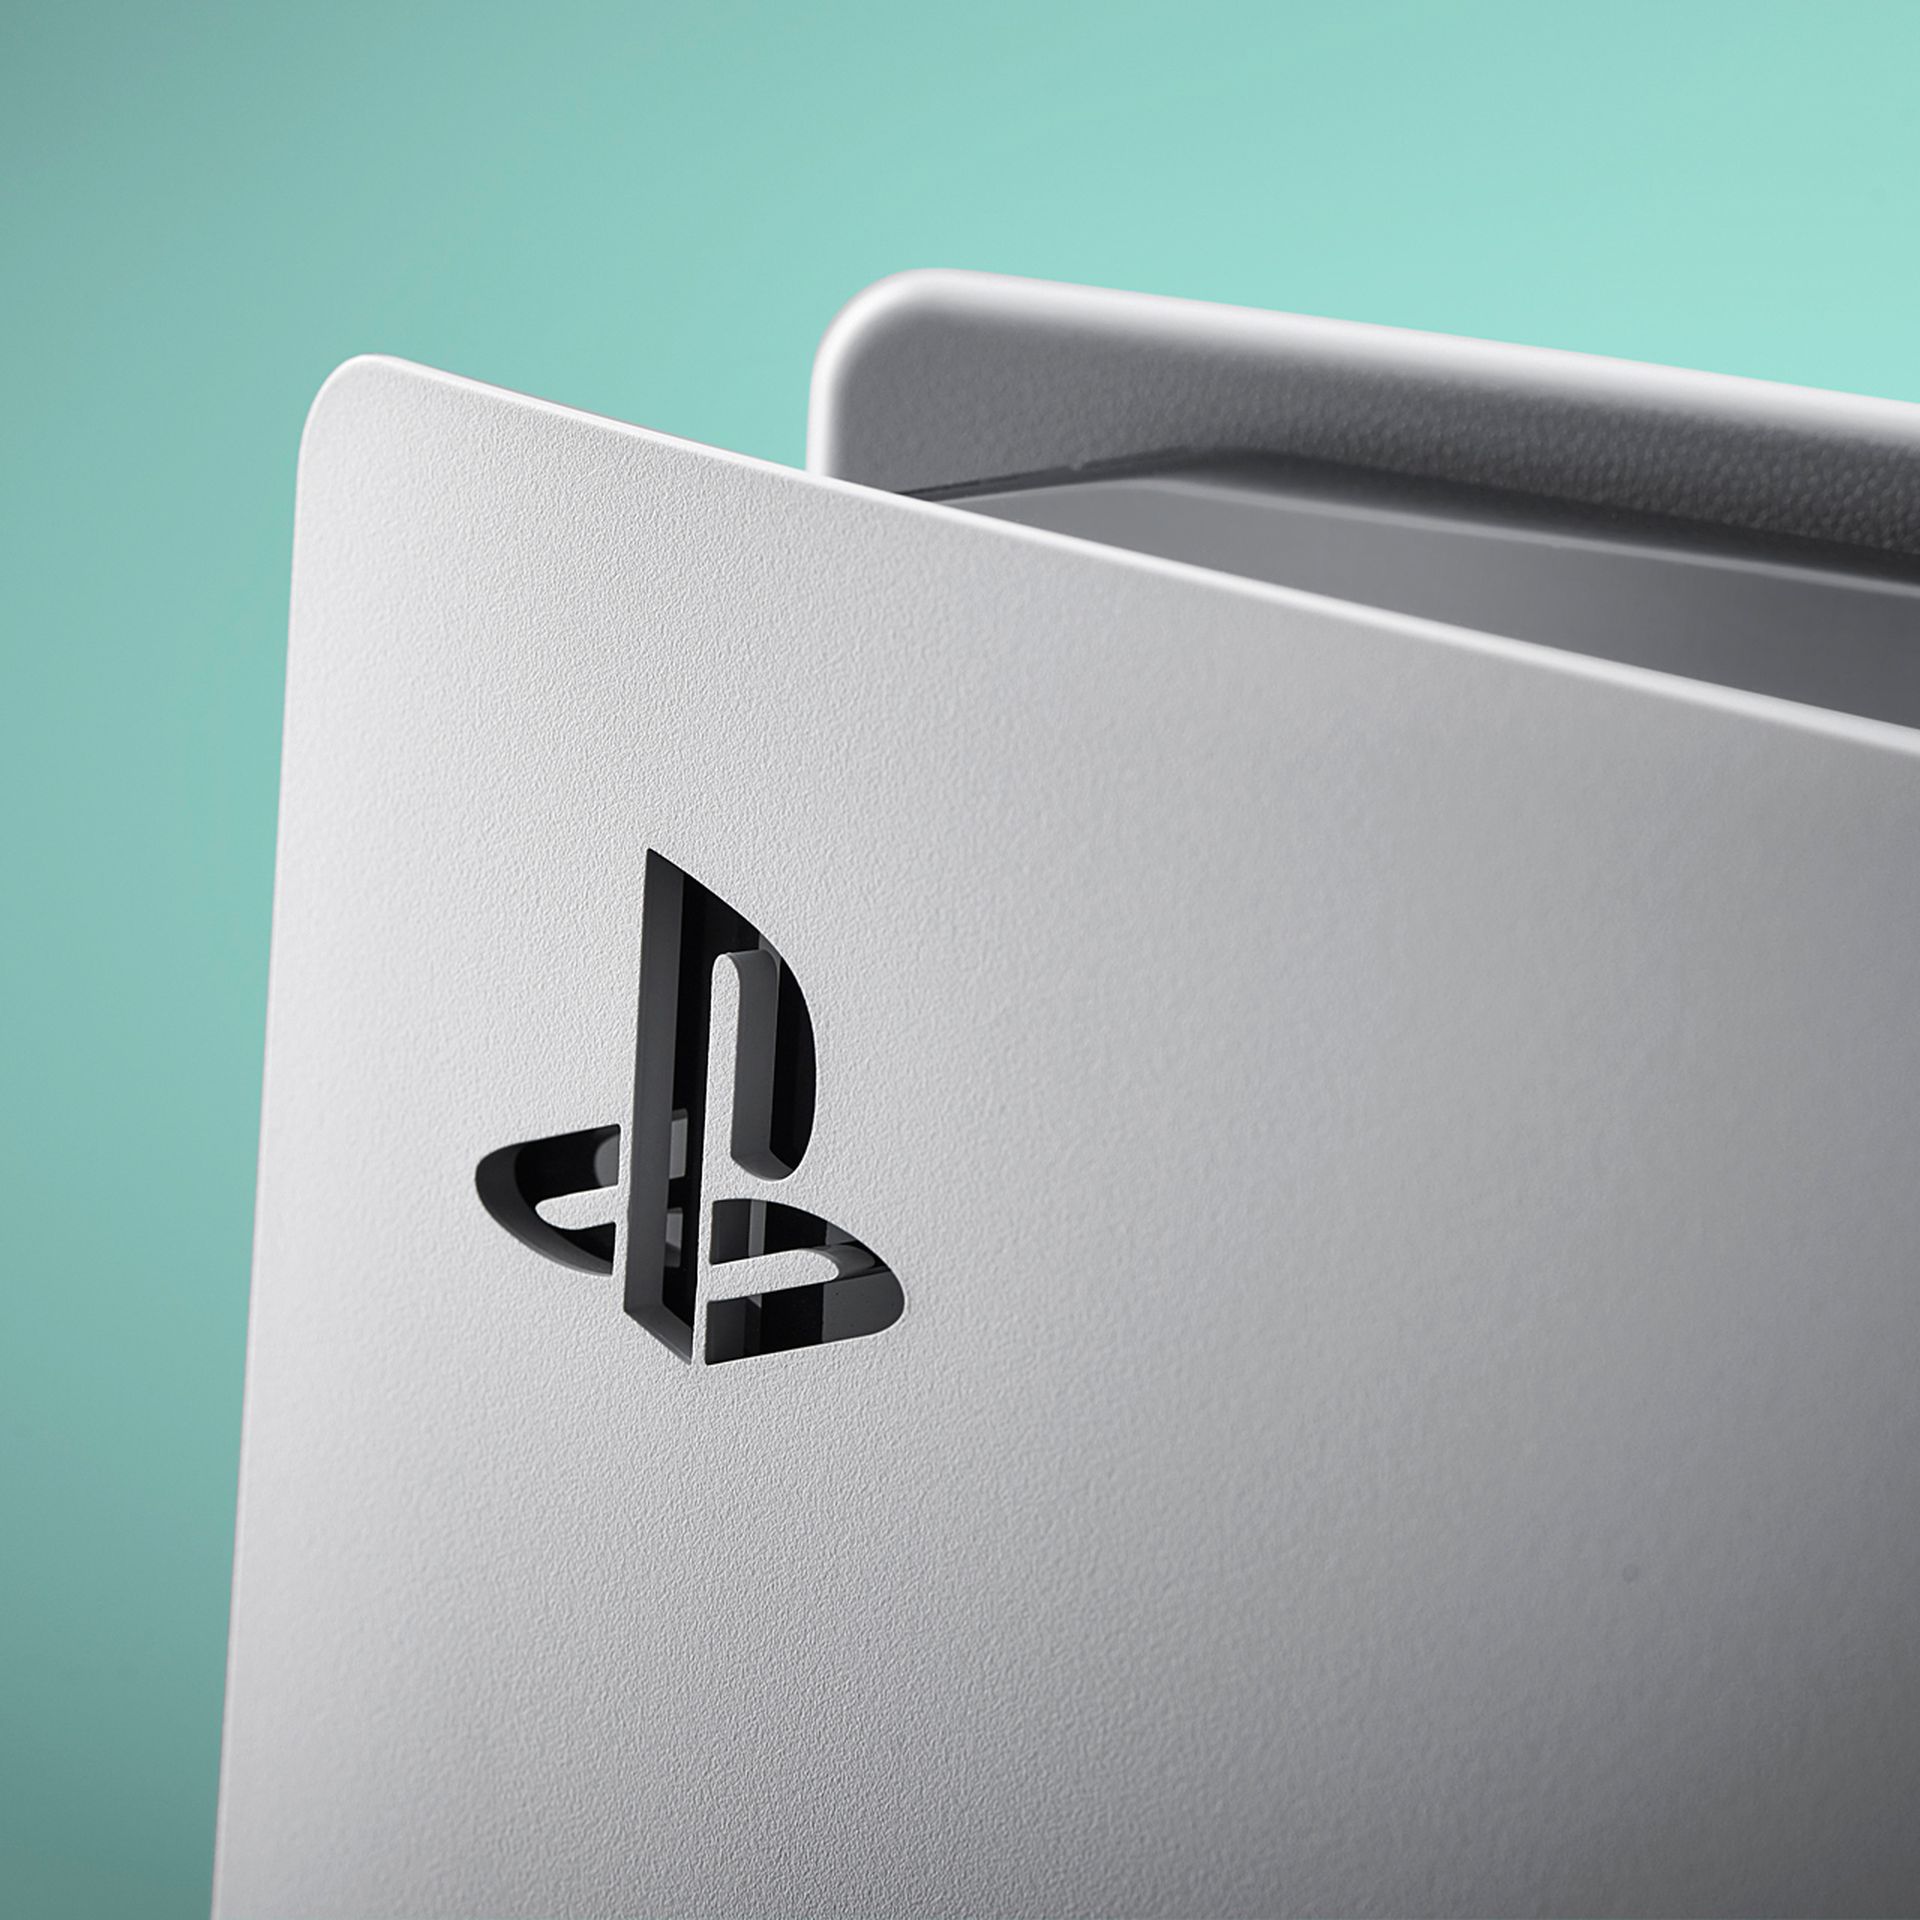 Close-up photo of the corner of a PlayStation 5